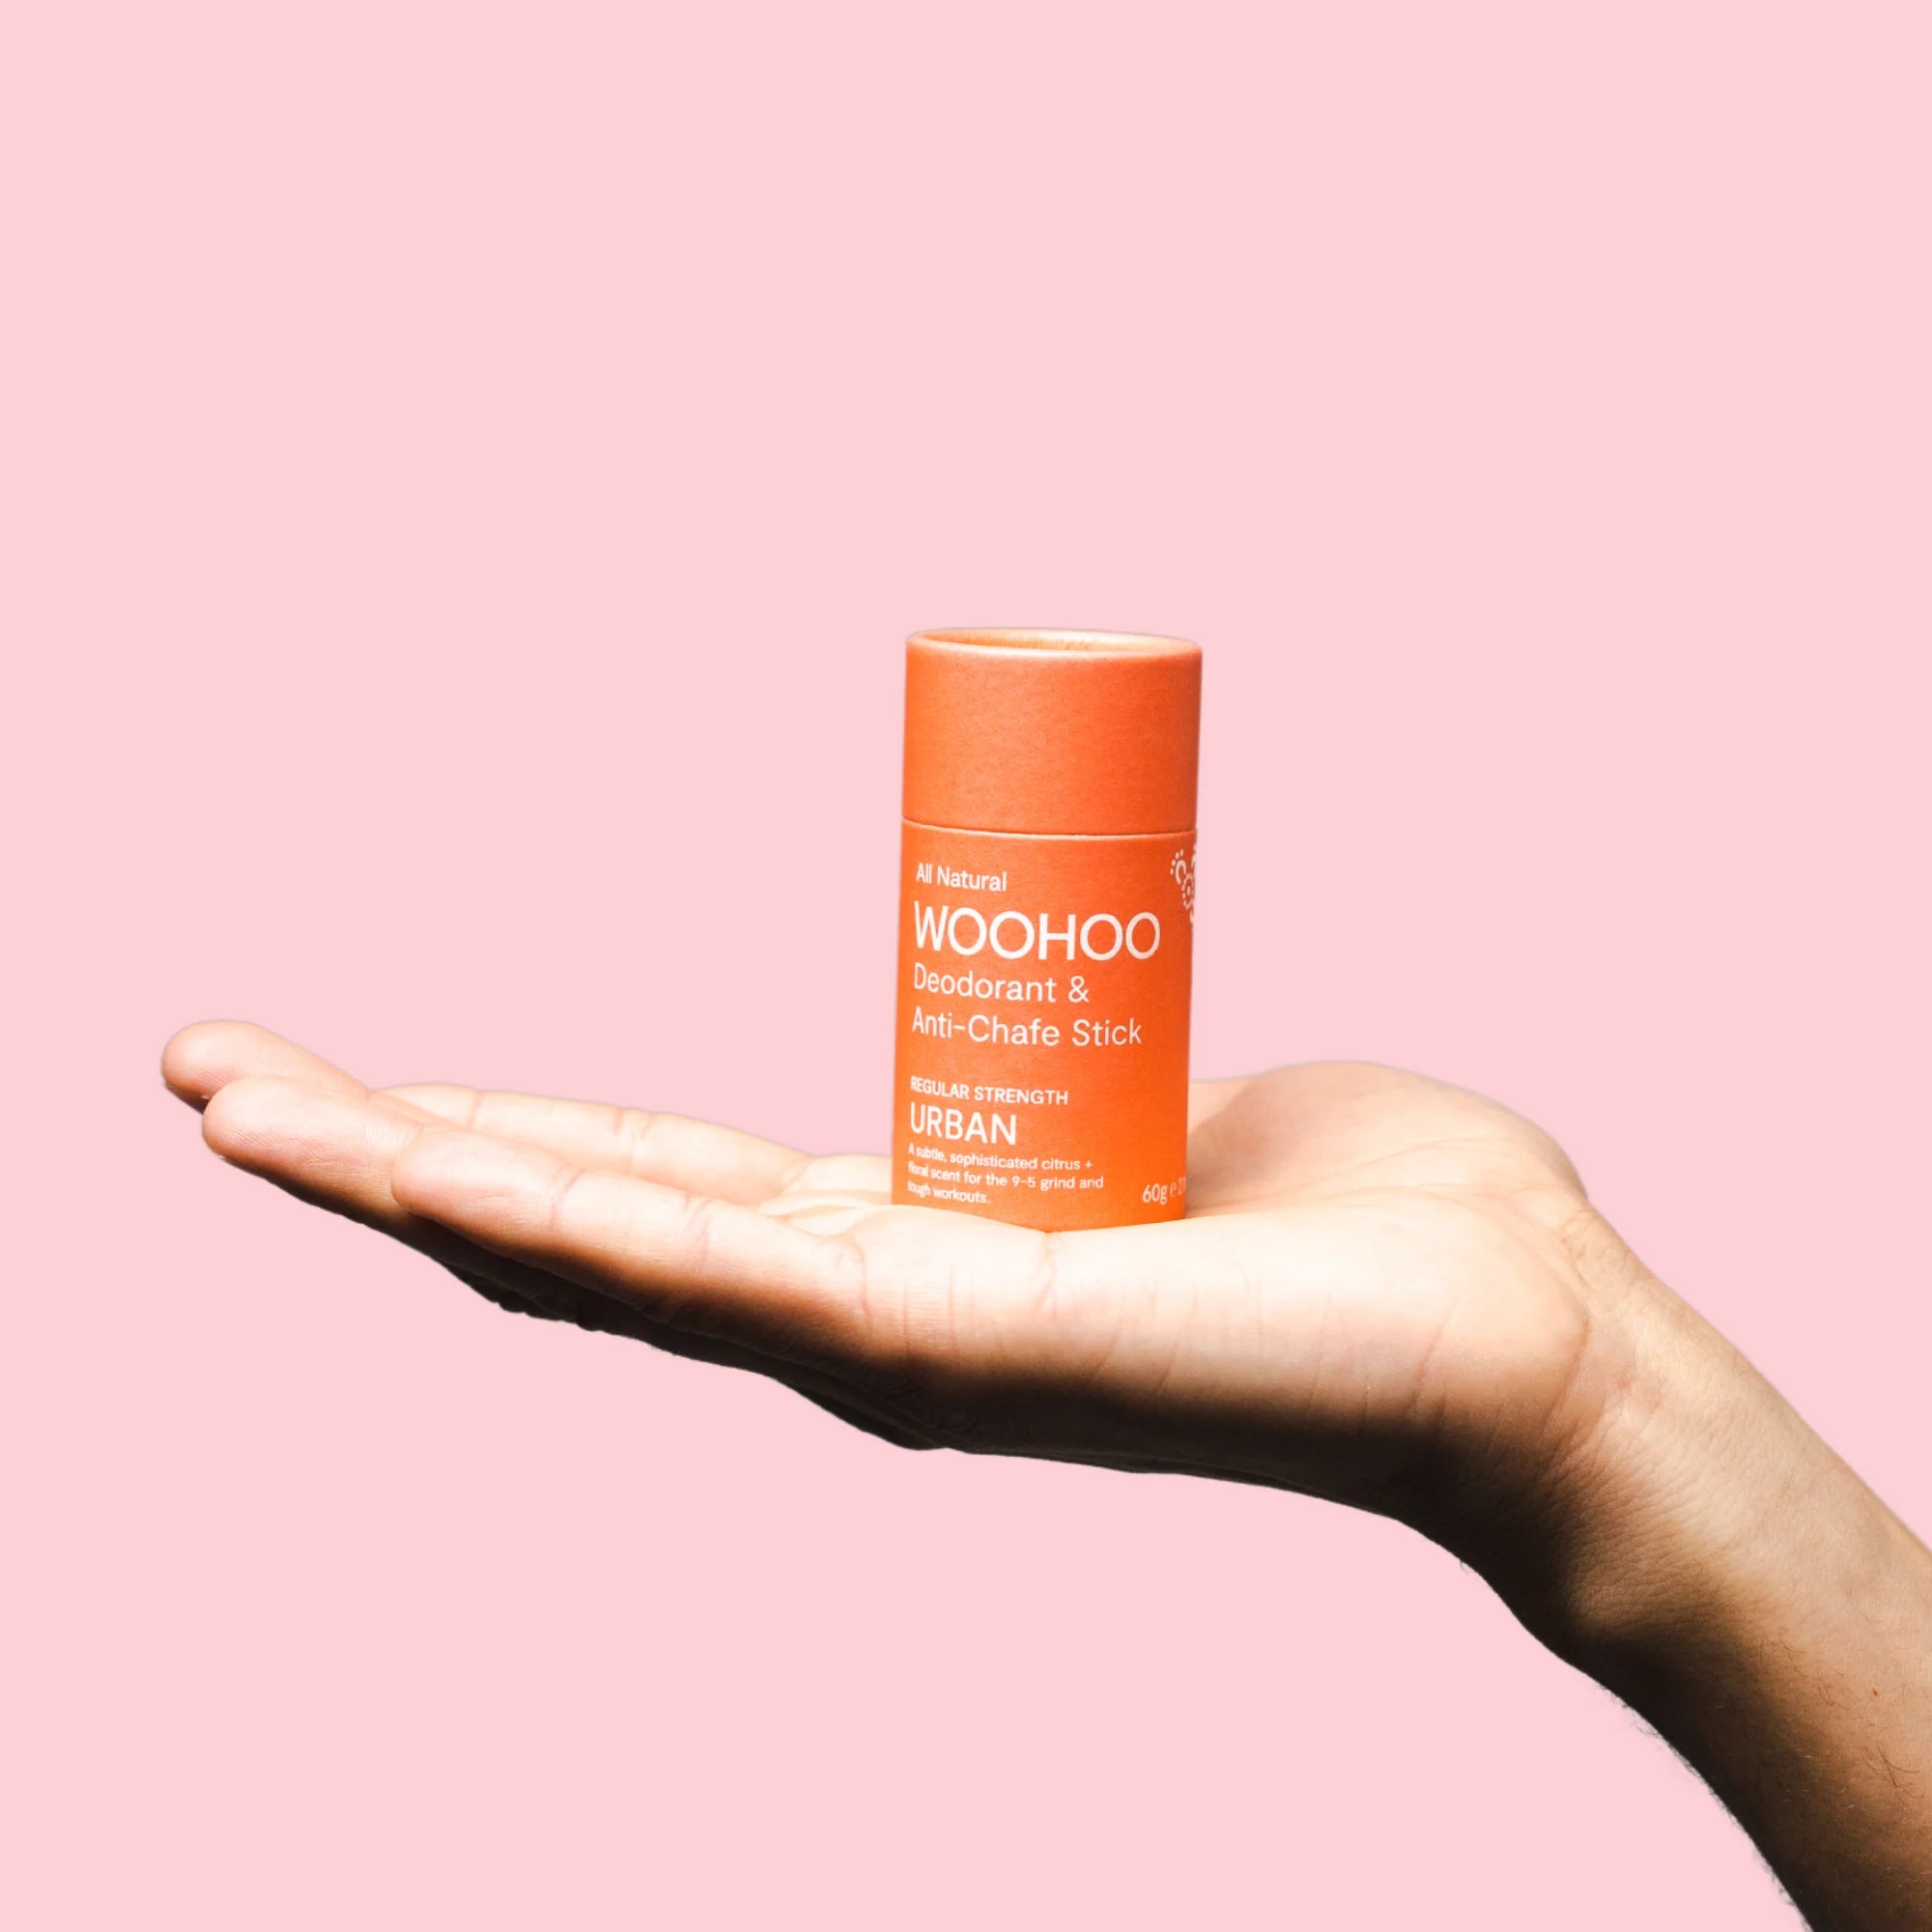 Image of Urban Natural Deodorant Stick sitting on the palm of a hand with a pink background